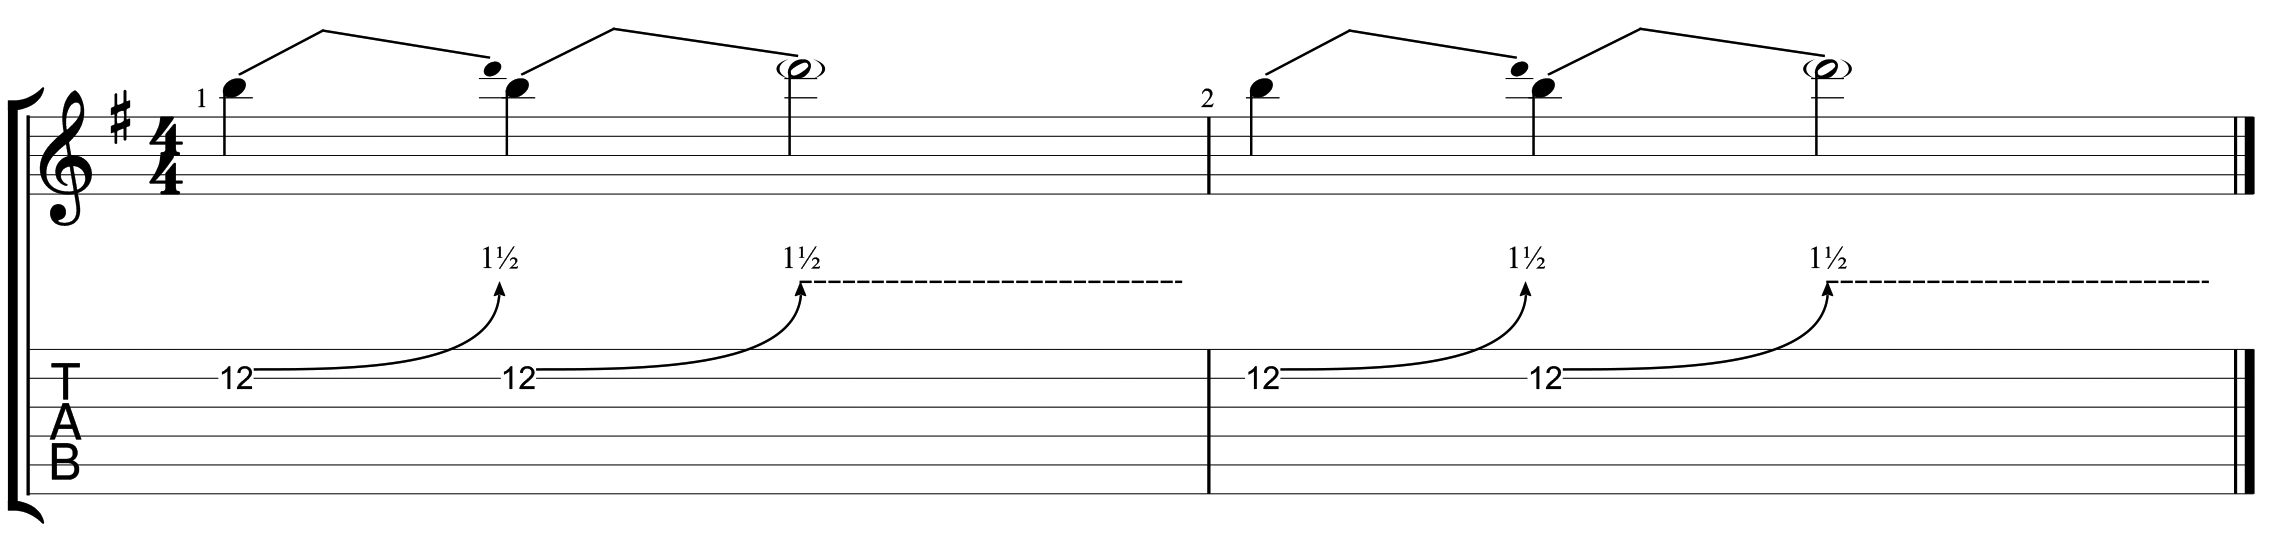 How to read guitar tablature 12